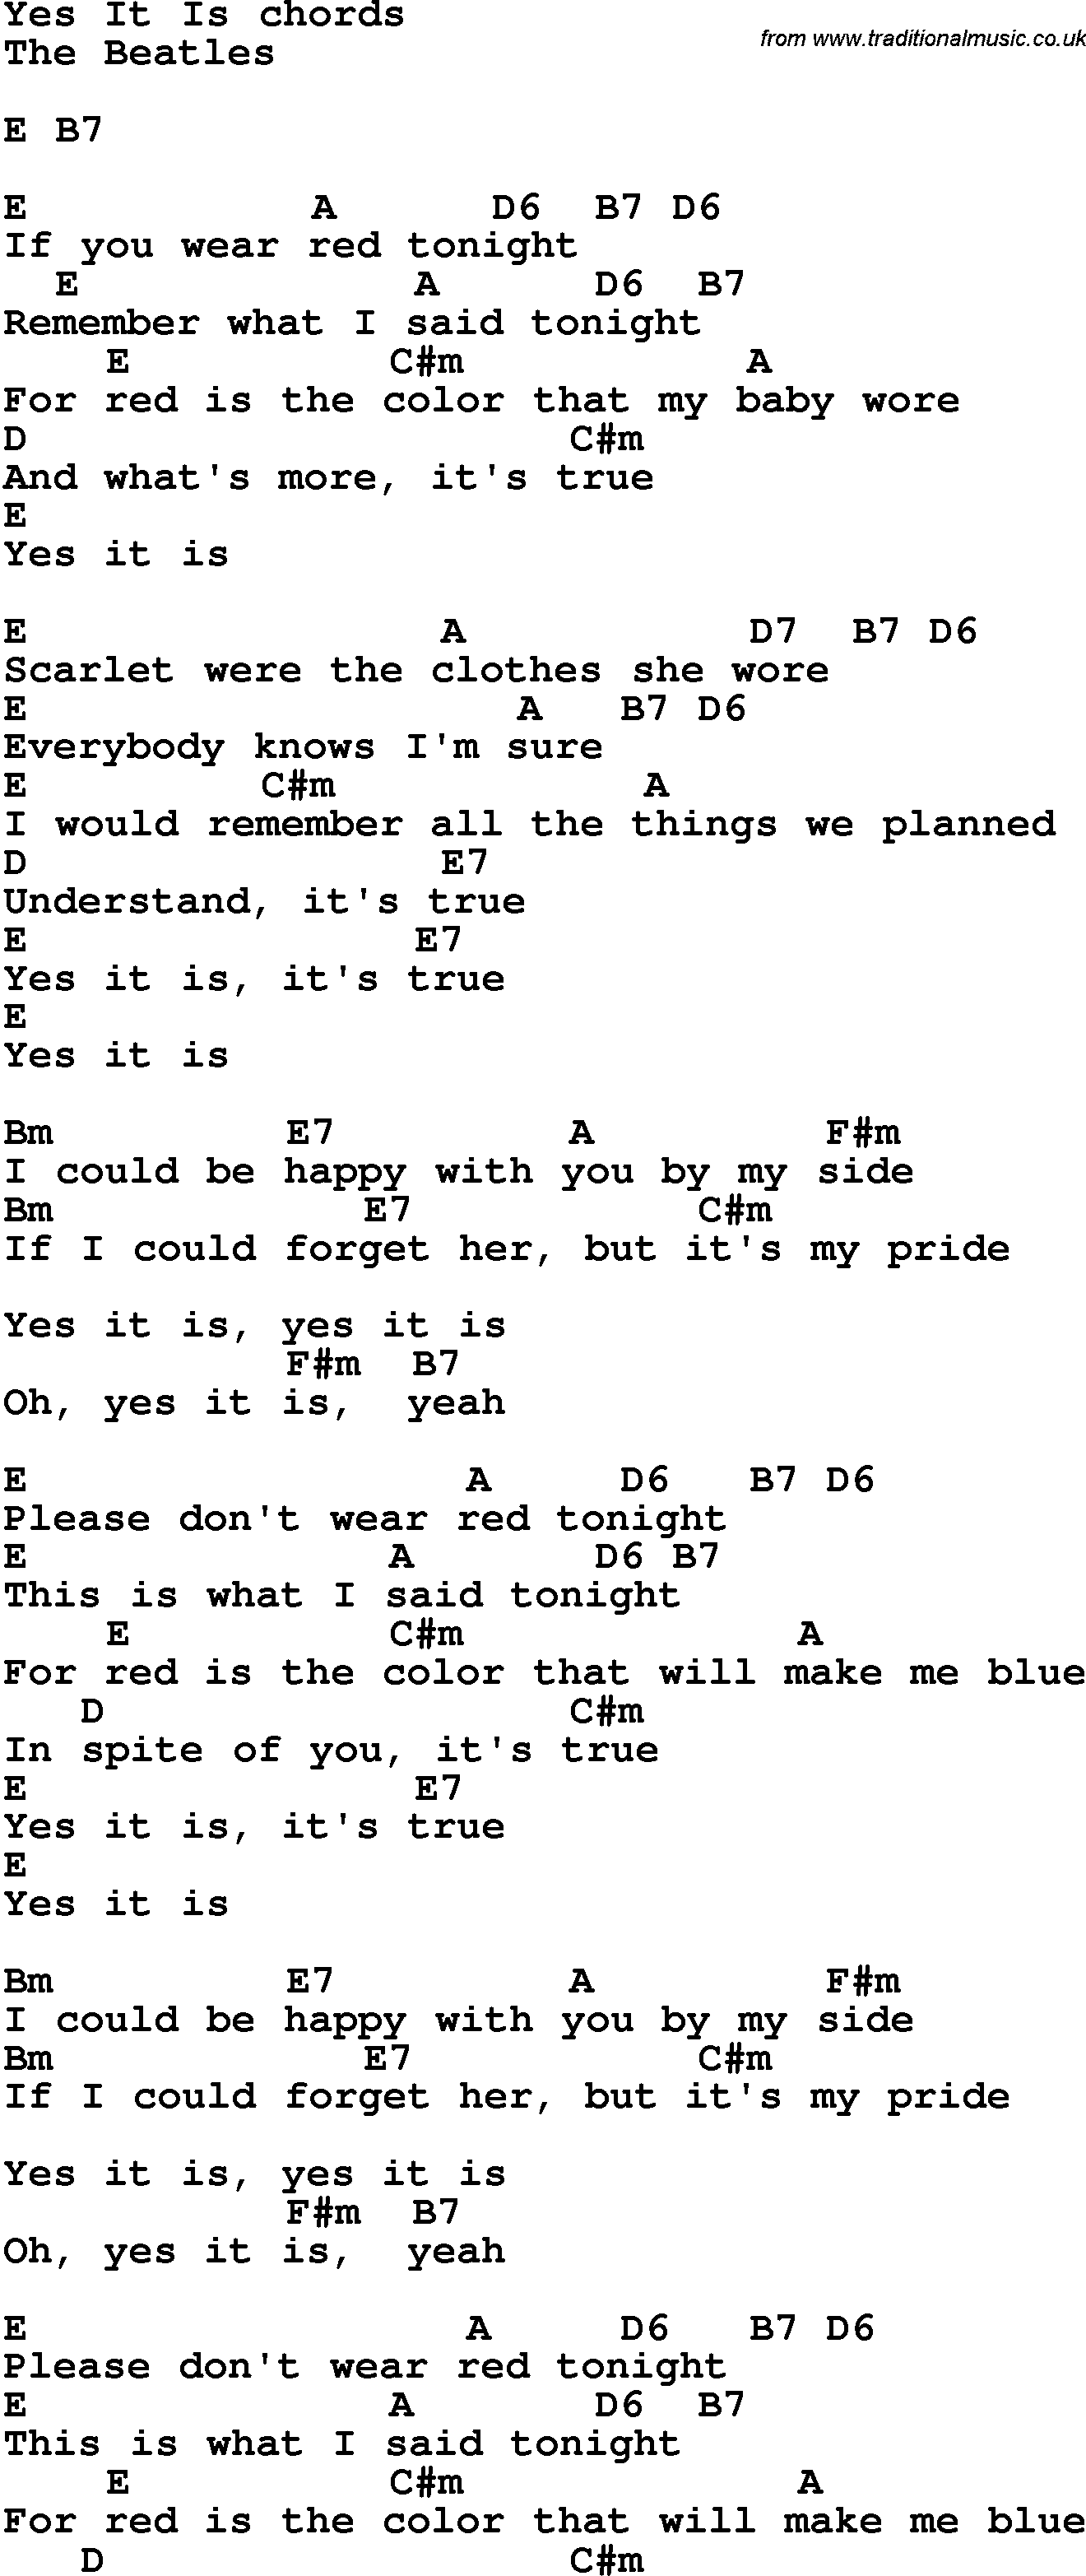 Song Lyrics with guitar chords for Yes It Is